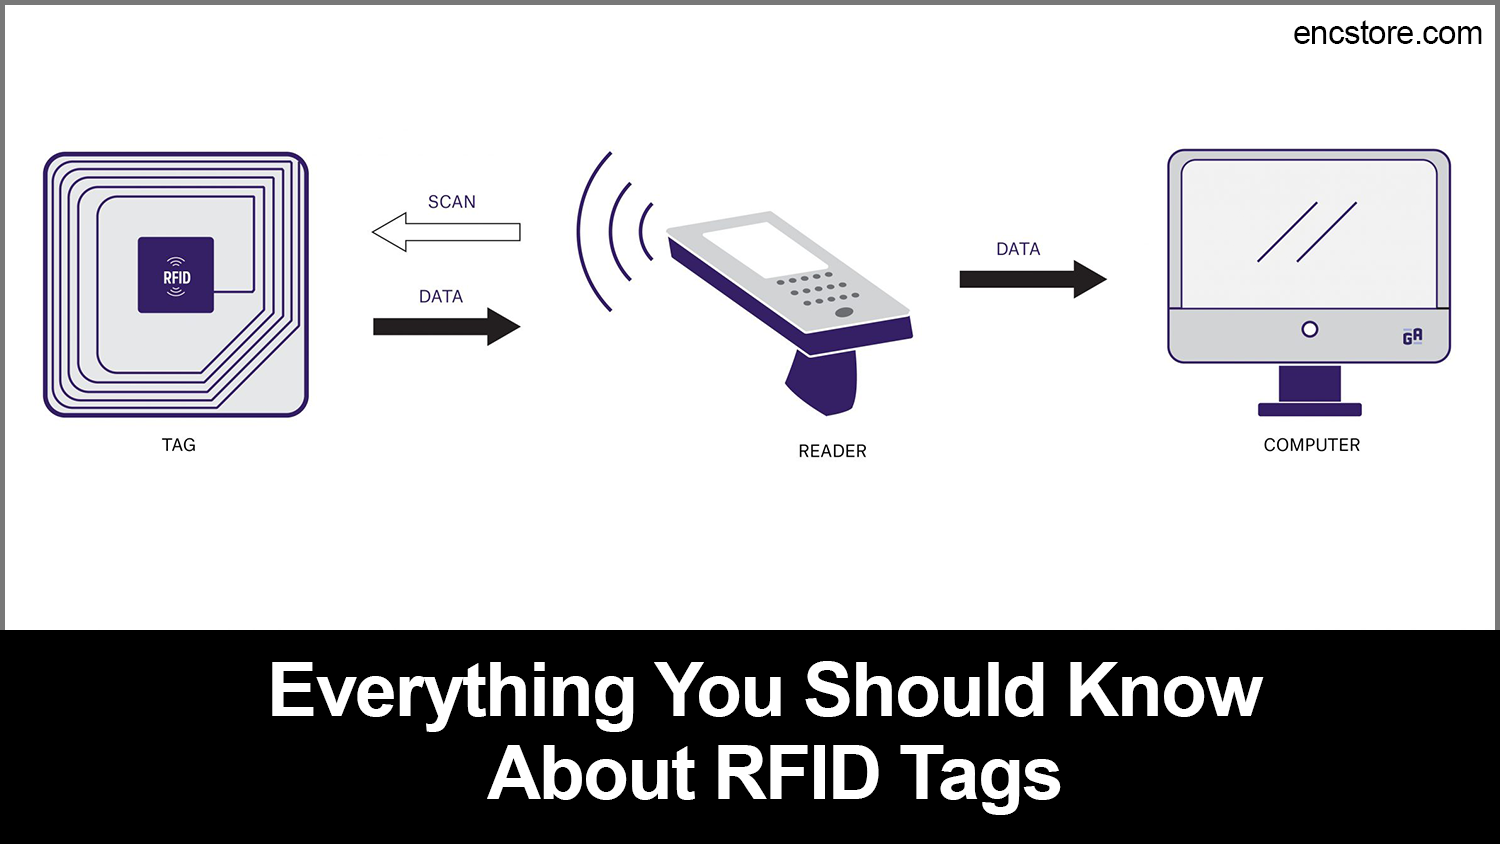 Everything You Should Know About RFID Tags